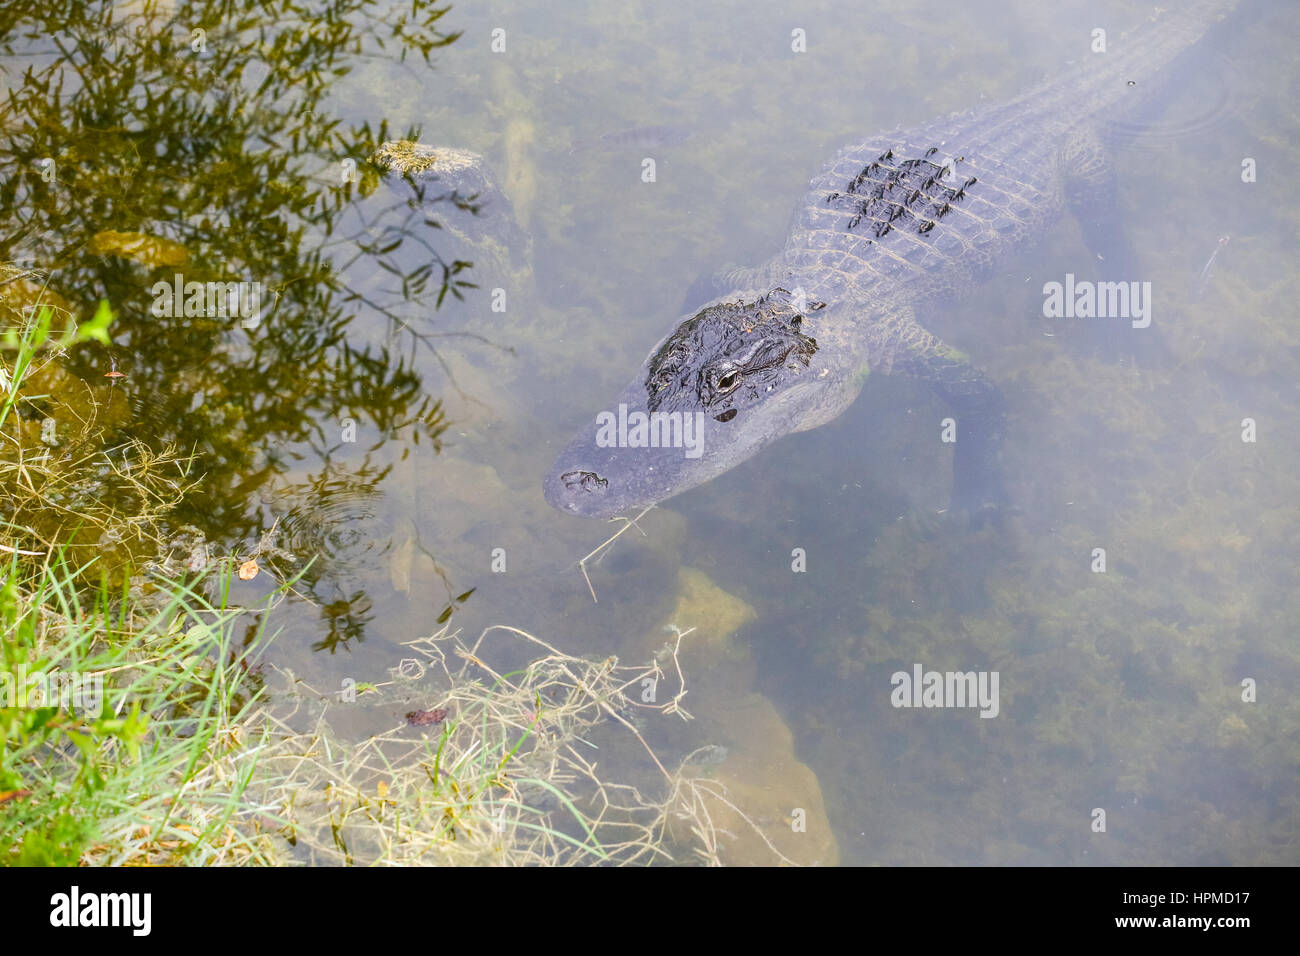 Ochopee, USA - MAY 11, 2015: American alligator lurking on the riverbanks. The animal is close under the water surface, the eyes are above water. Stock Photo